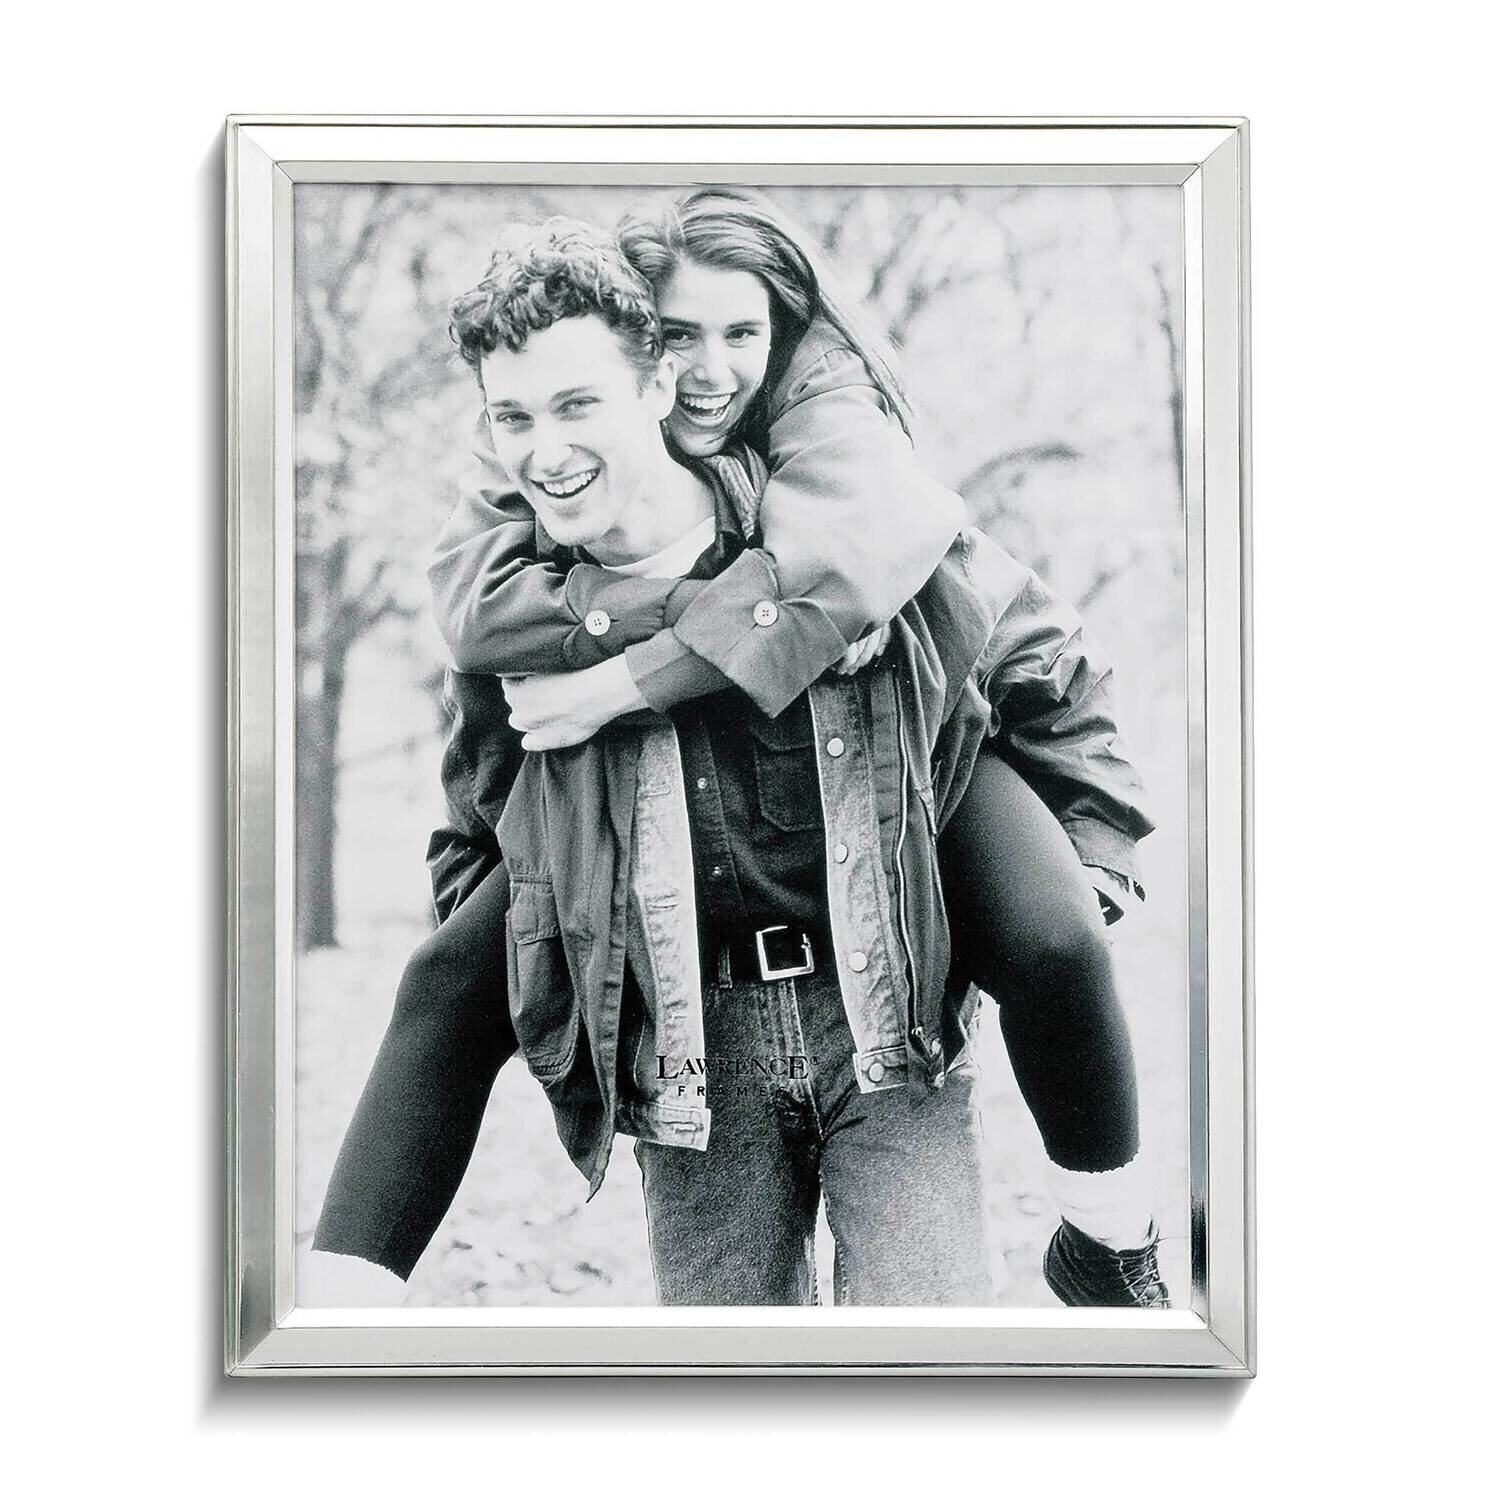 Silver-plated Classic 8 x 10 Inch Photo Picture Frame GL9484